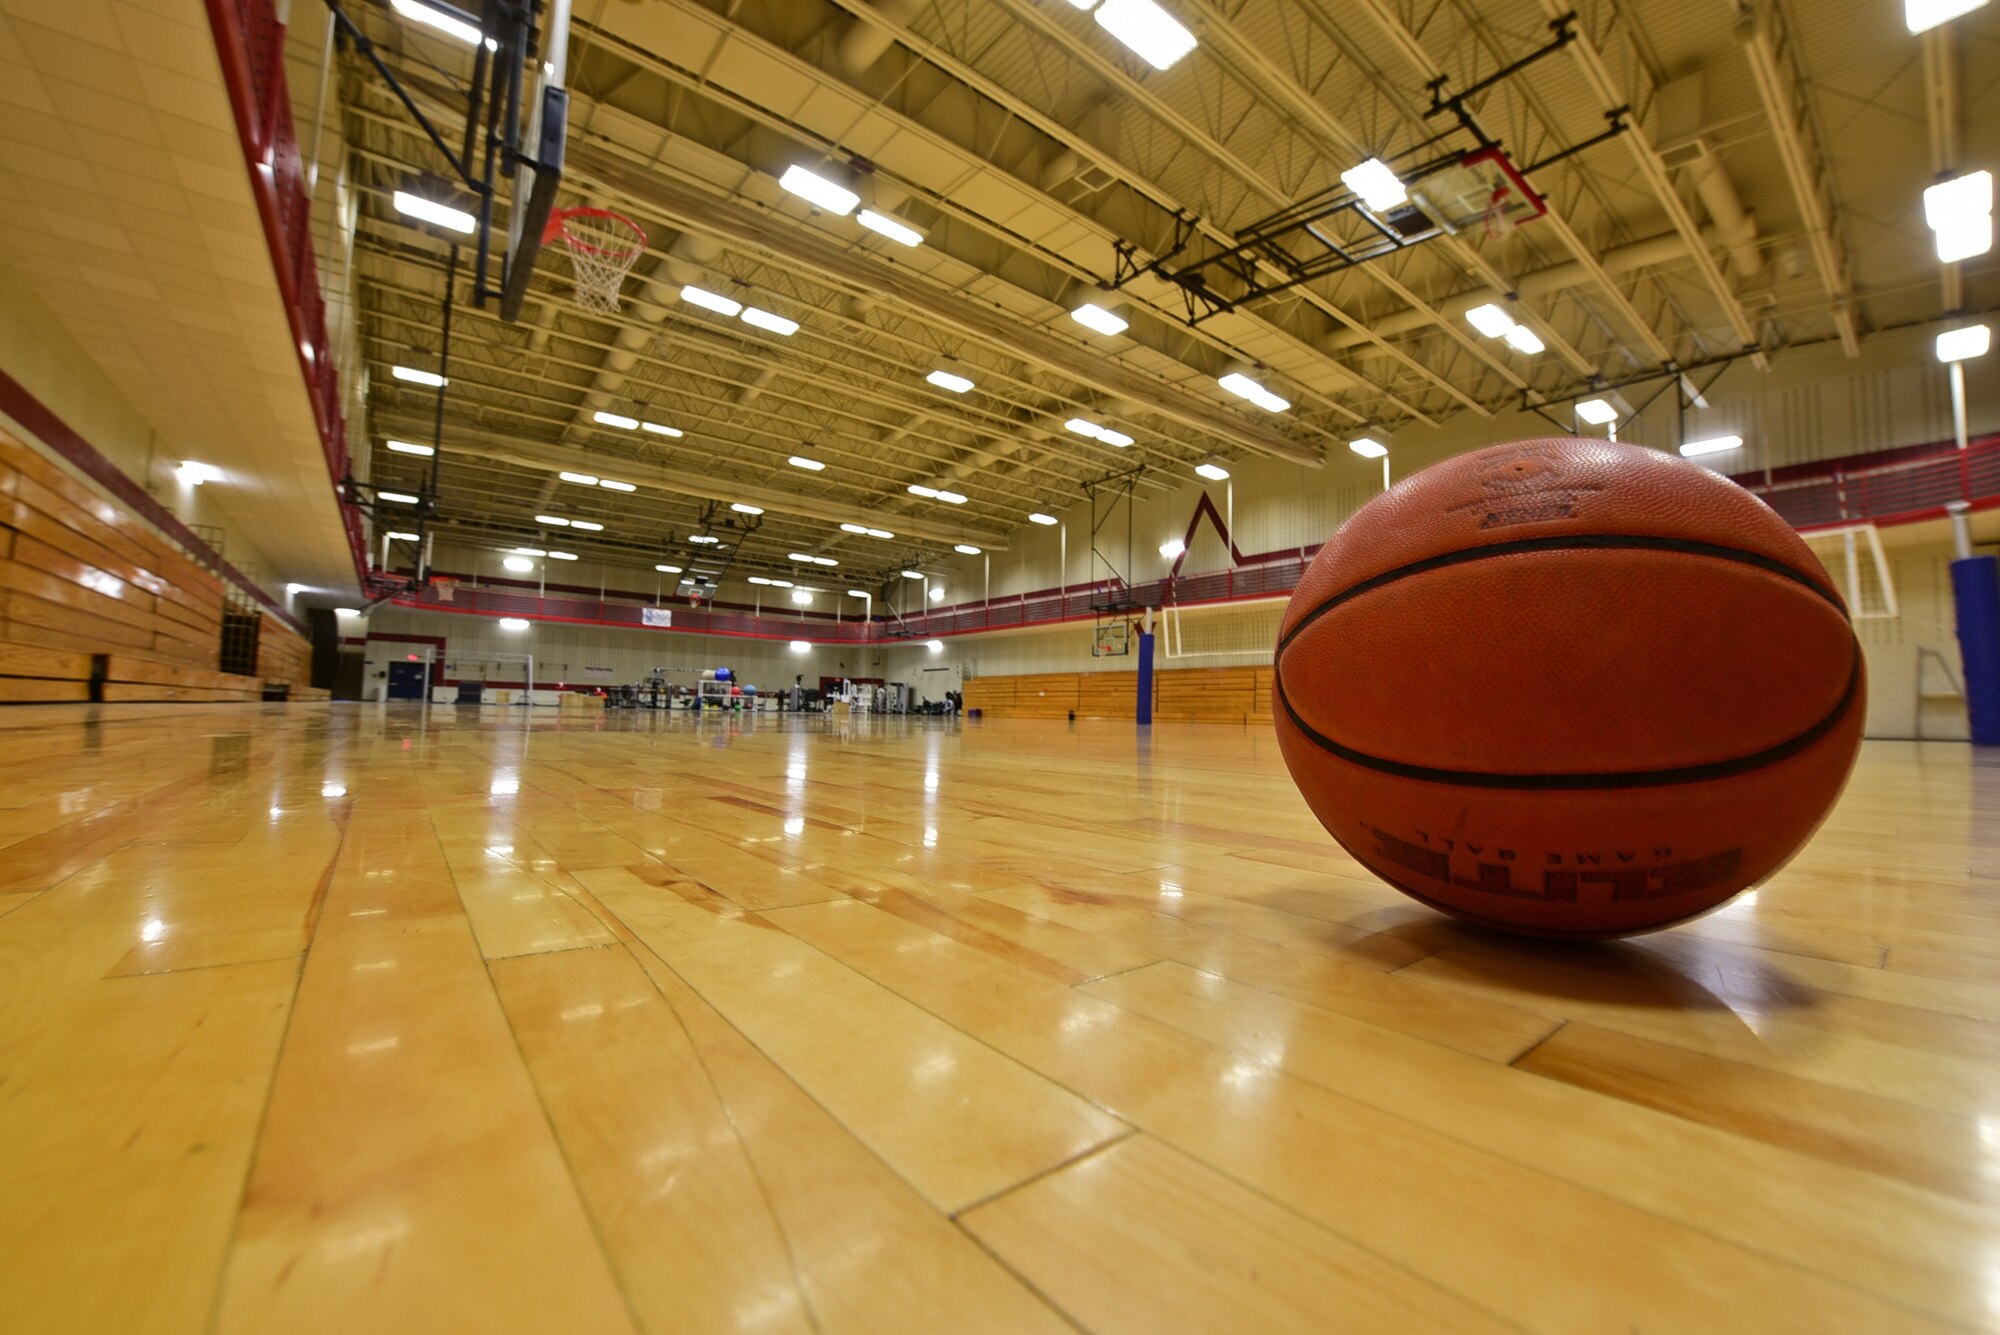 A basketball sits ready to be dribbled on one of the full sized basketball courts in the Bellamy Fitness Center at Ellsworth Air Force Base, S.D., Jan. 9, 2017. The fitness center boasts a variety of rooms with exercise equipment ranging from free weights, cardio machines and an indoor swimming pool. (U.S. Air Force photo by Airman 1st Class James L. Miller)